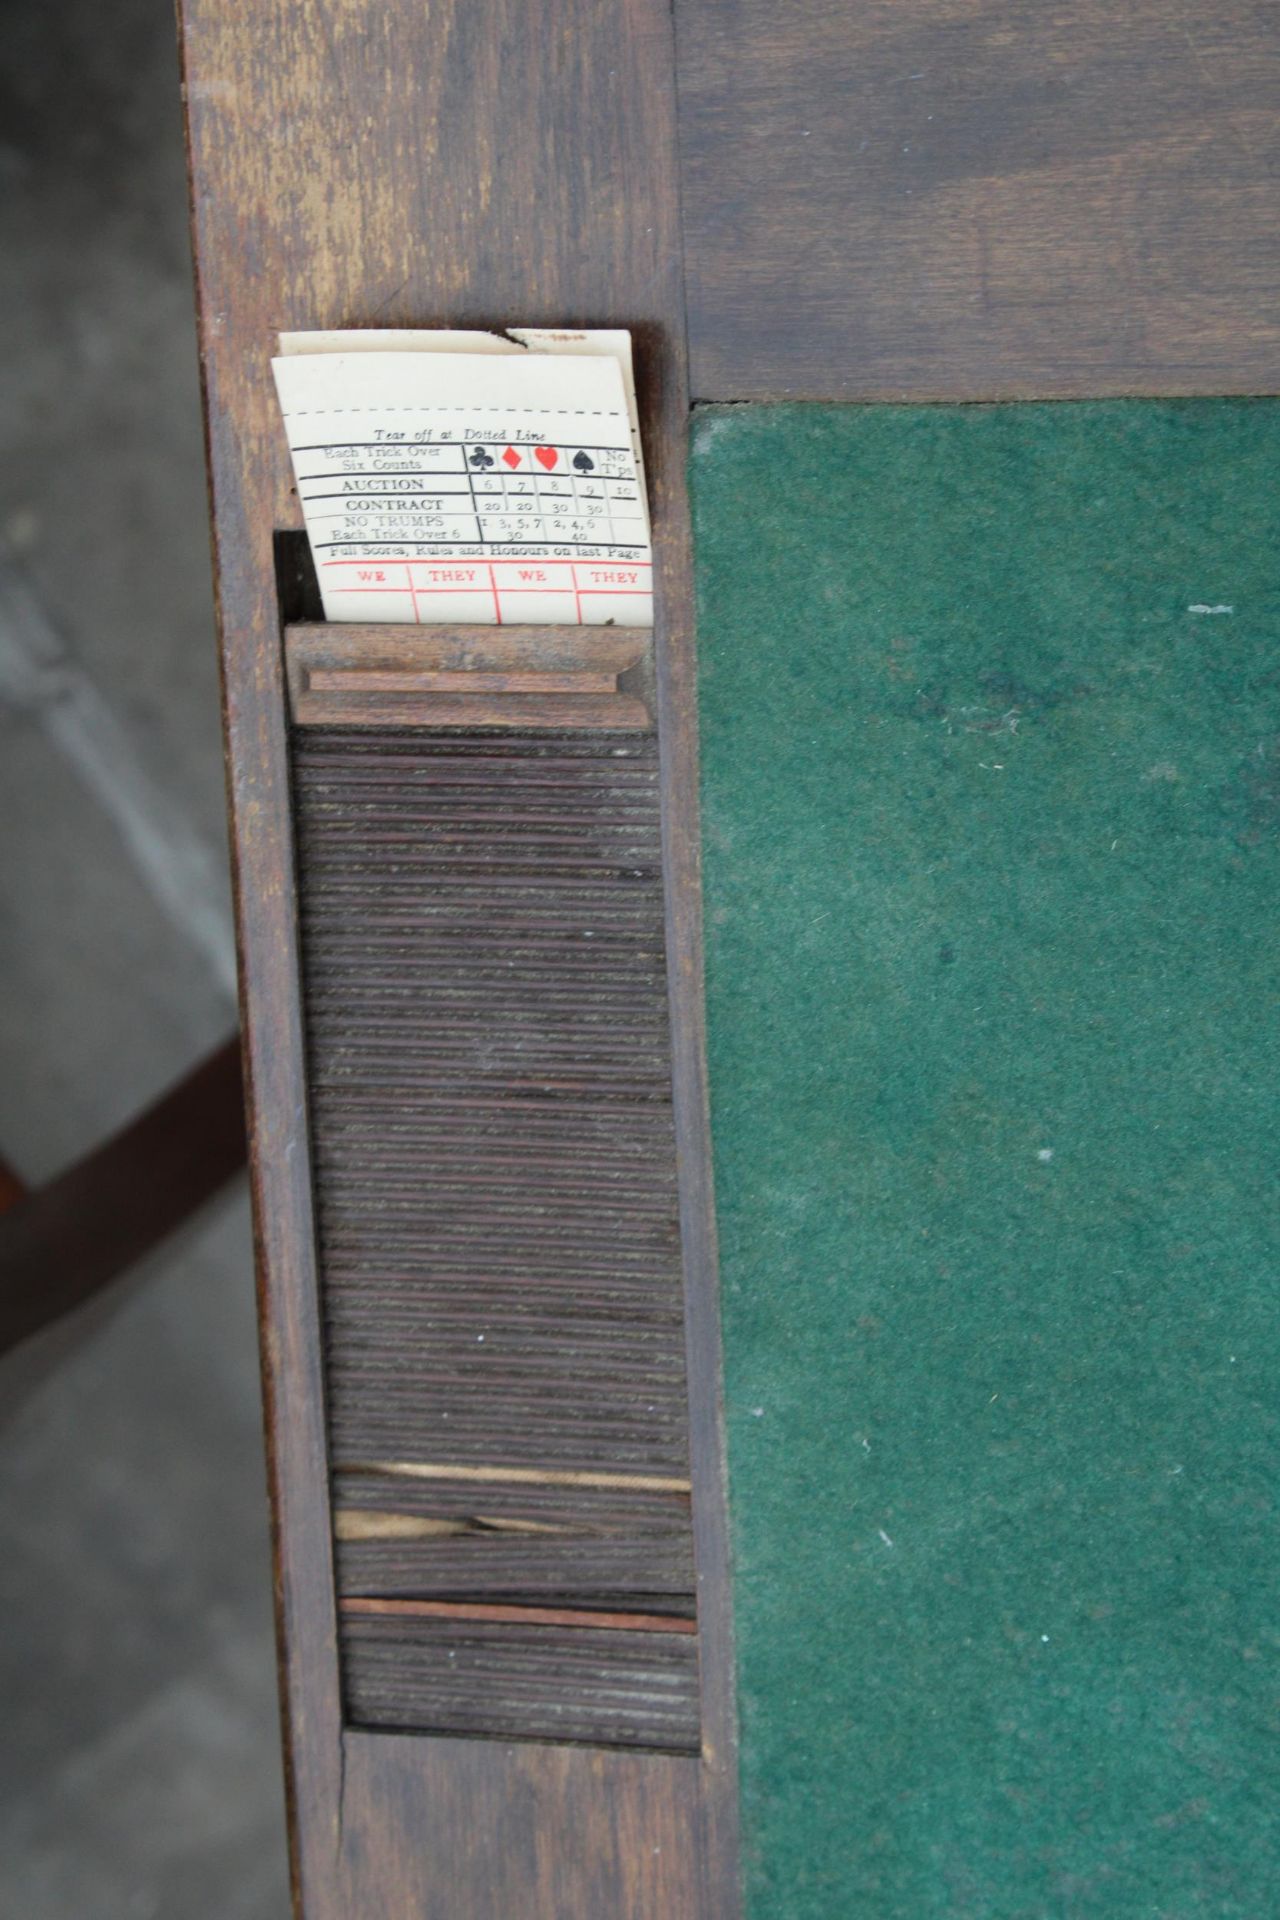 AN EARLY 20TH CENTURY FOLDING CARD TABLE WITH BAKALITE FOLD AWAY GLASS HOLDERS AND TAMBOUR SCORE - Image 6 of 7